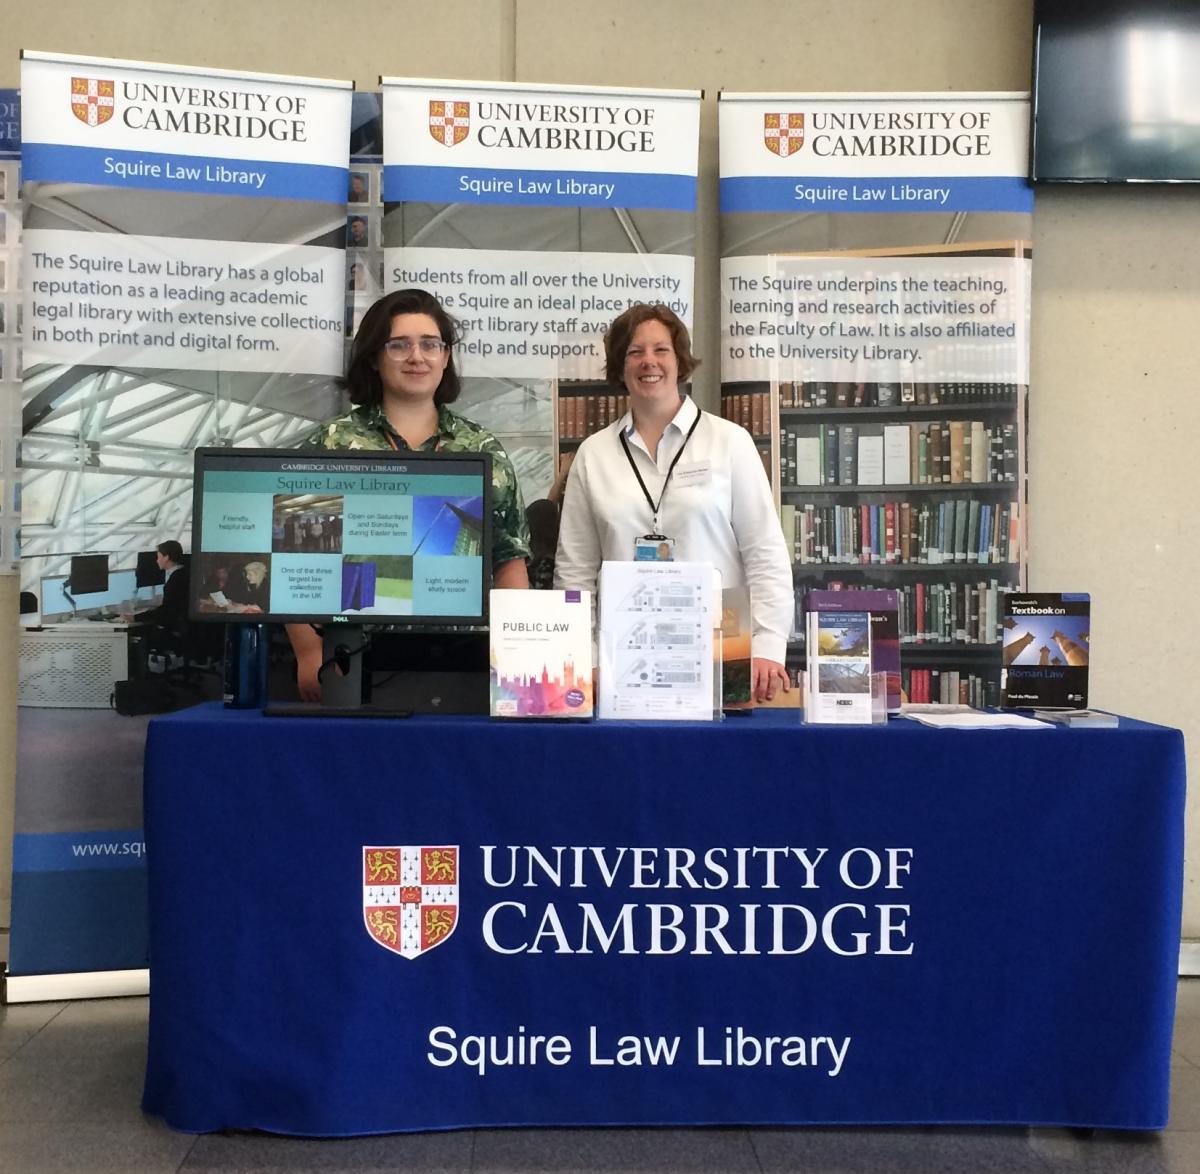 Squire Law Library team members with display stand